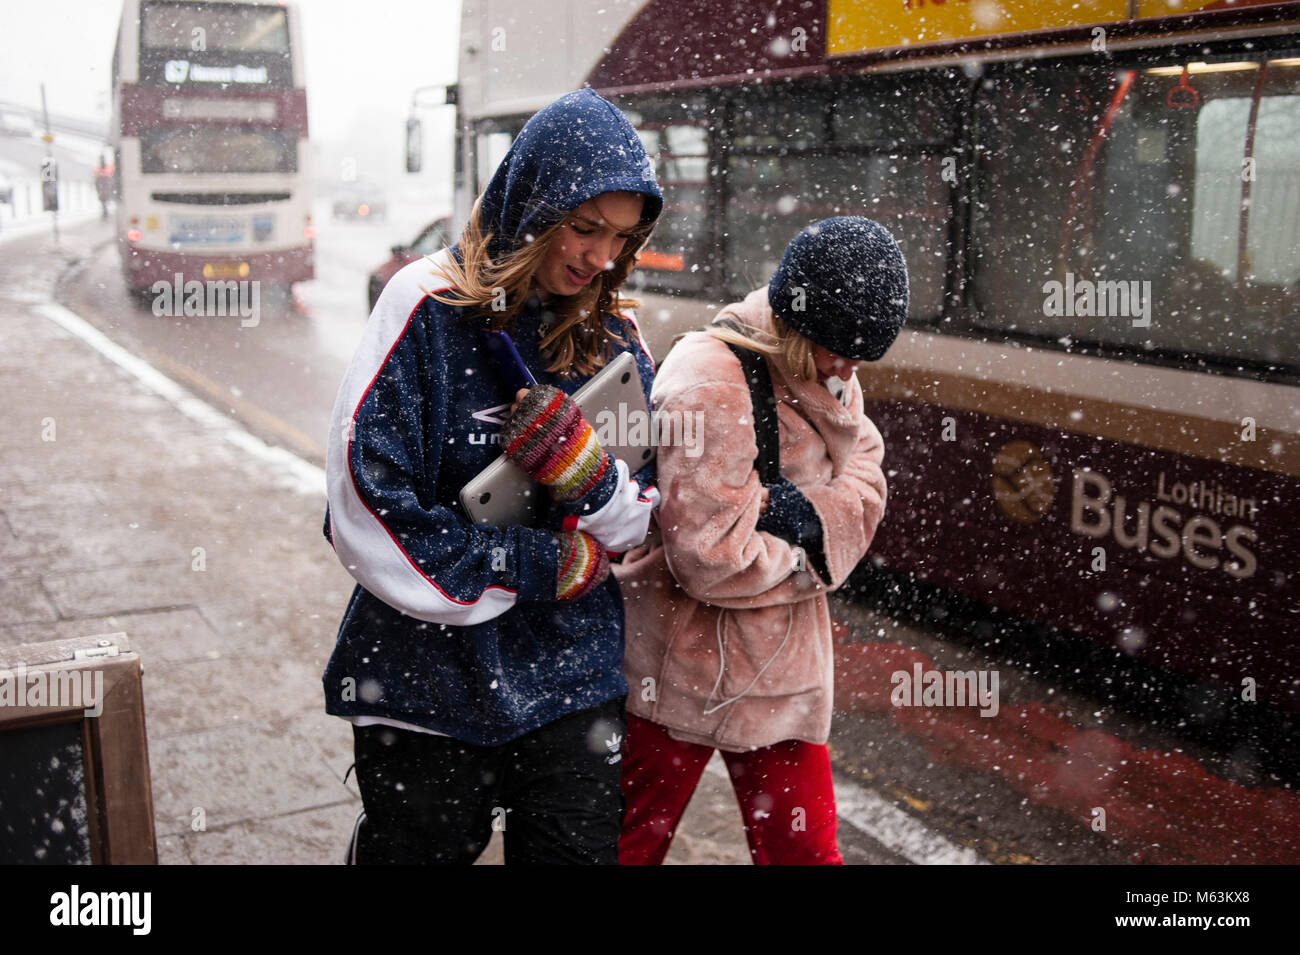 Edinburgh, Scotland. 28th of February 2018. UK weather: Snow showers due to "Beast from the East" on city of Edinburgh. People walking on the streets of Edinburgh. The expectations for the day are more snow showers because of the weather fenomenon "Beast from the East". Credit: Pep Masip/Alamy Live News Stock Photo